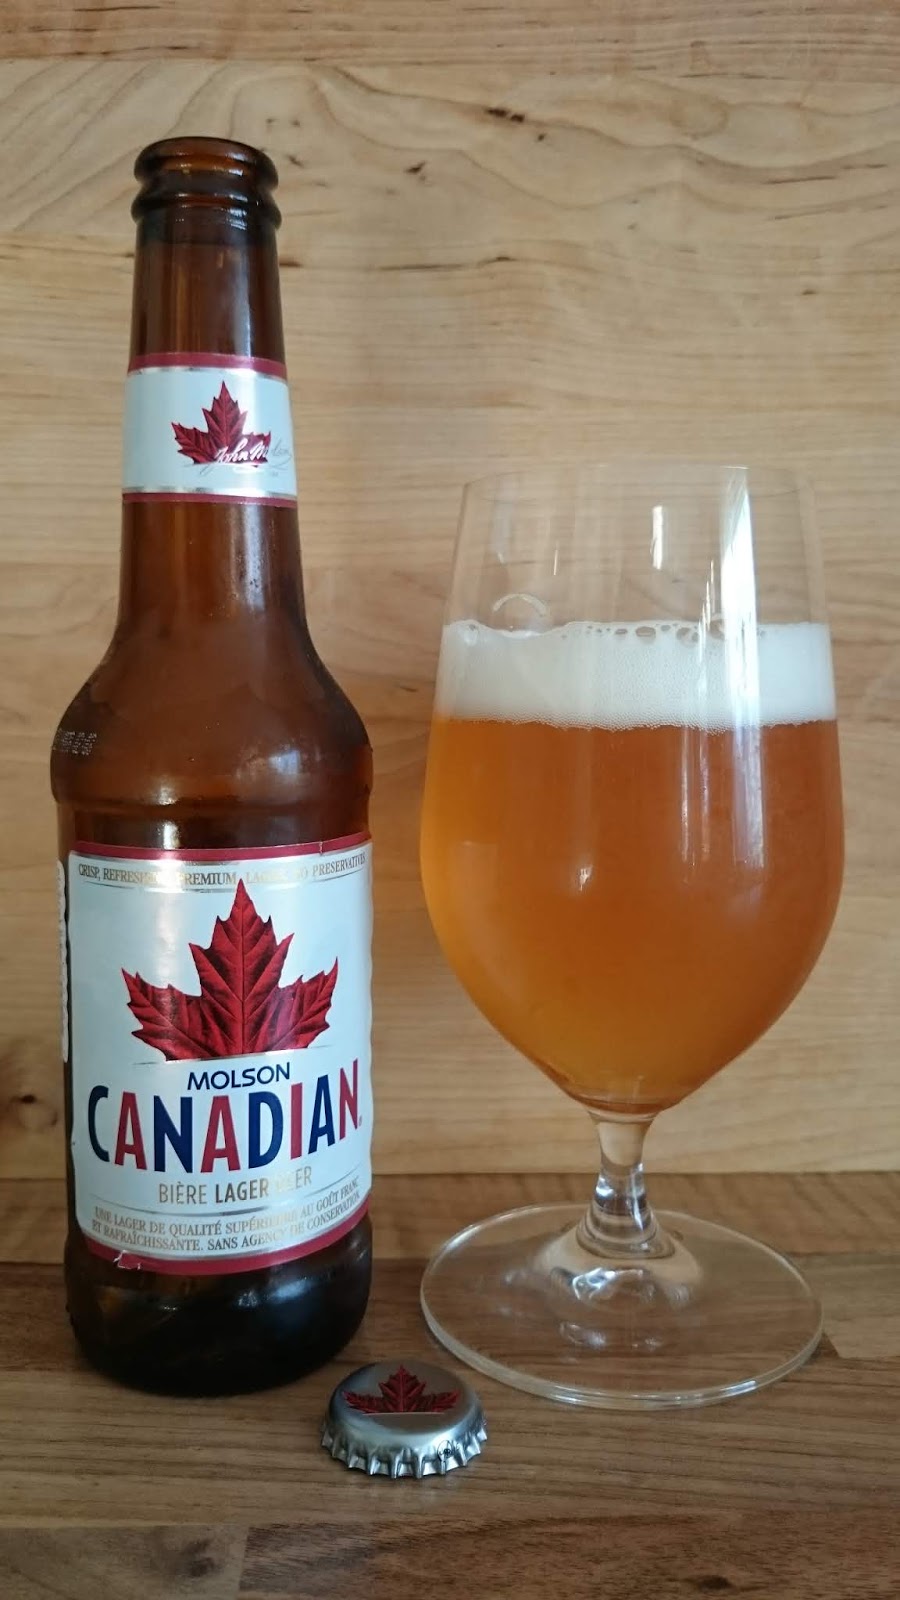 Molson Canadian Date Code